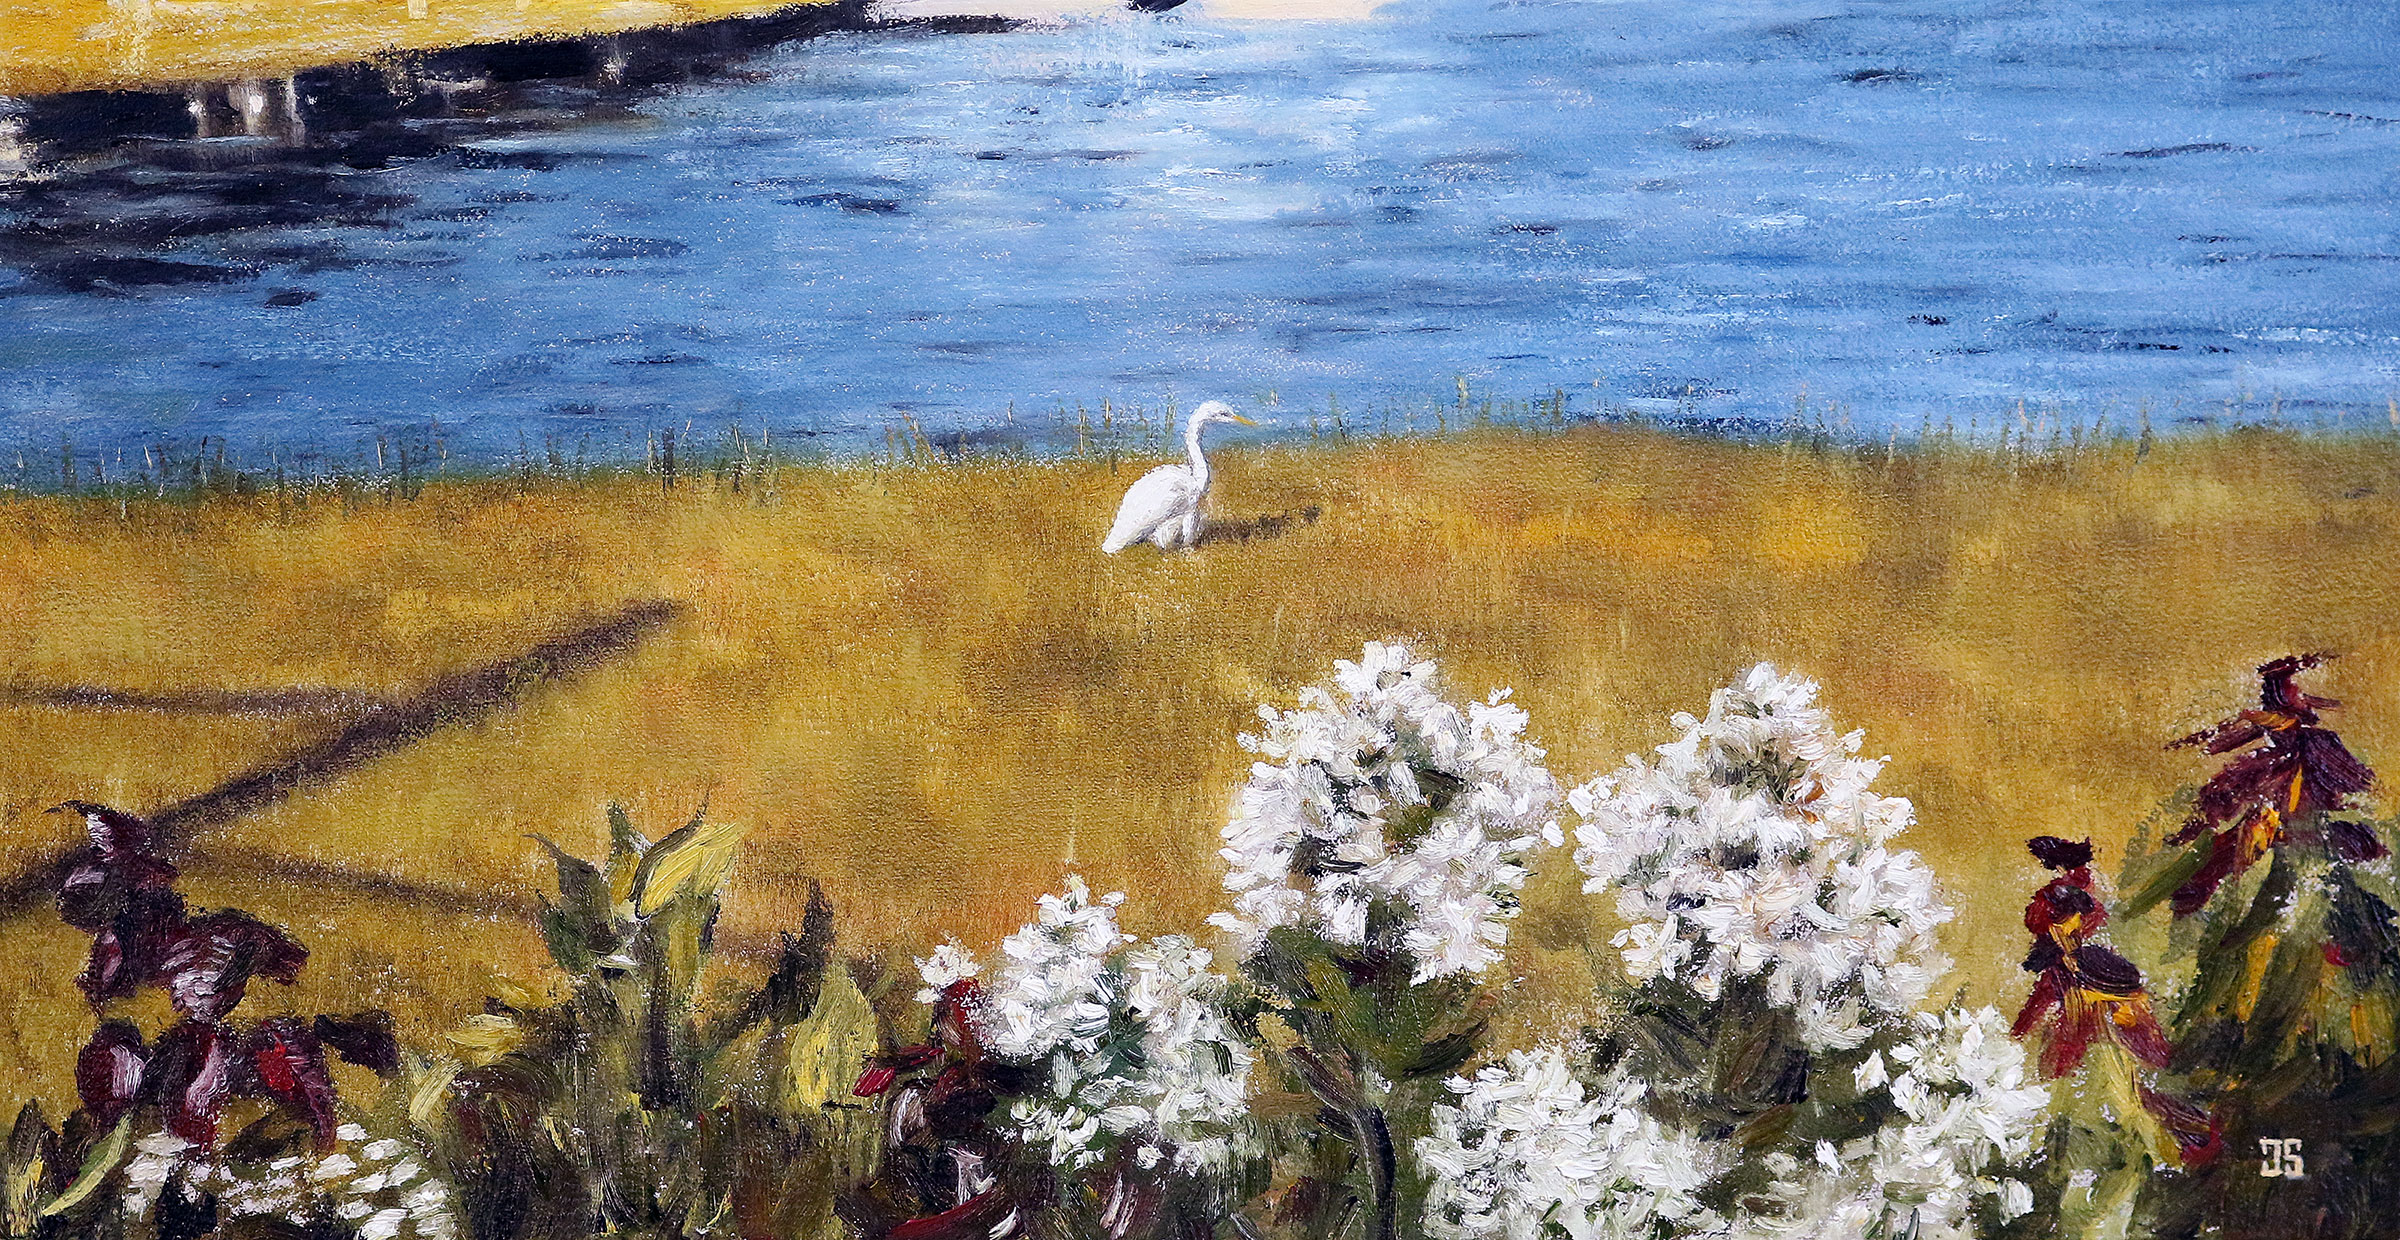 Oil painting "An Egret in Bourne" by Jeffrey Dale Starr